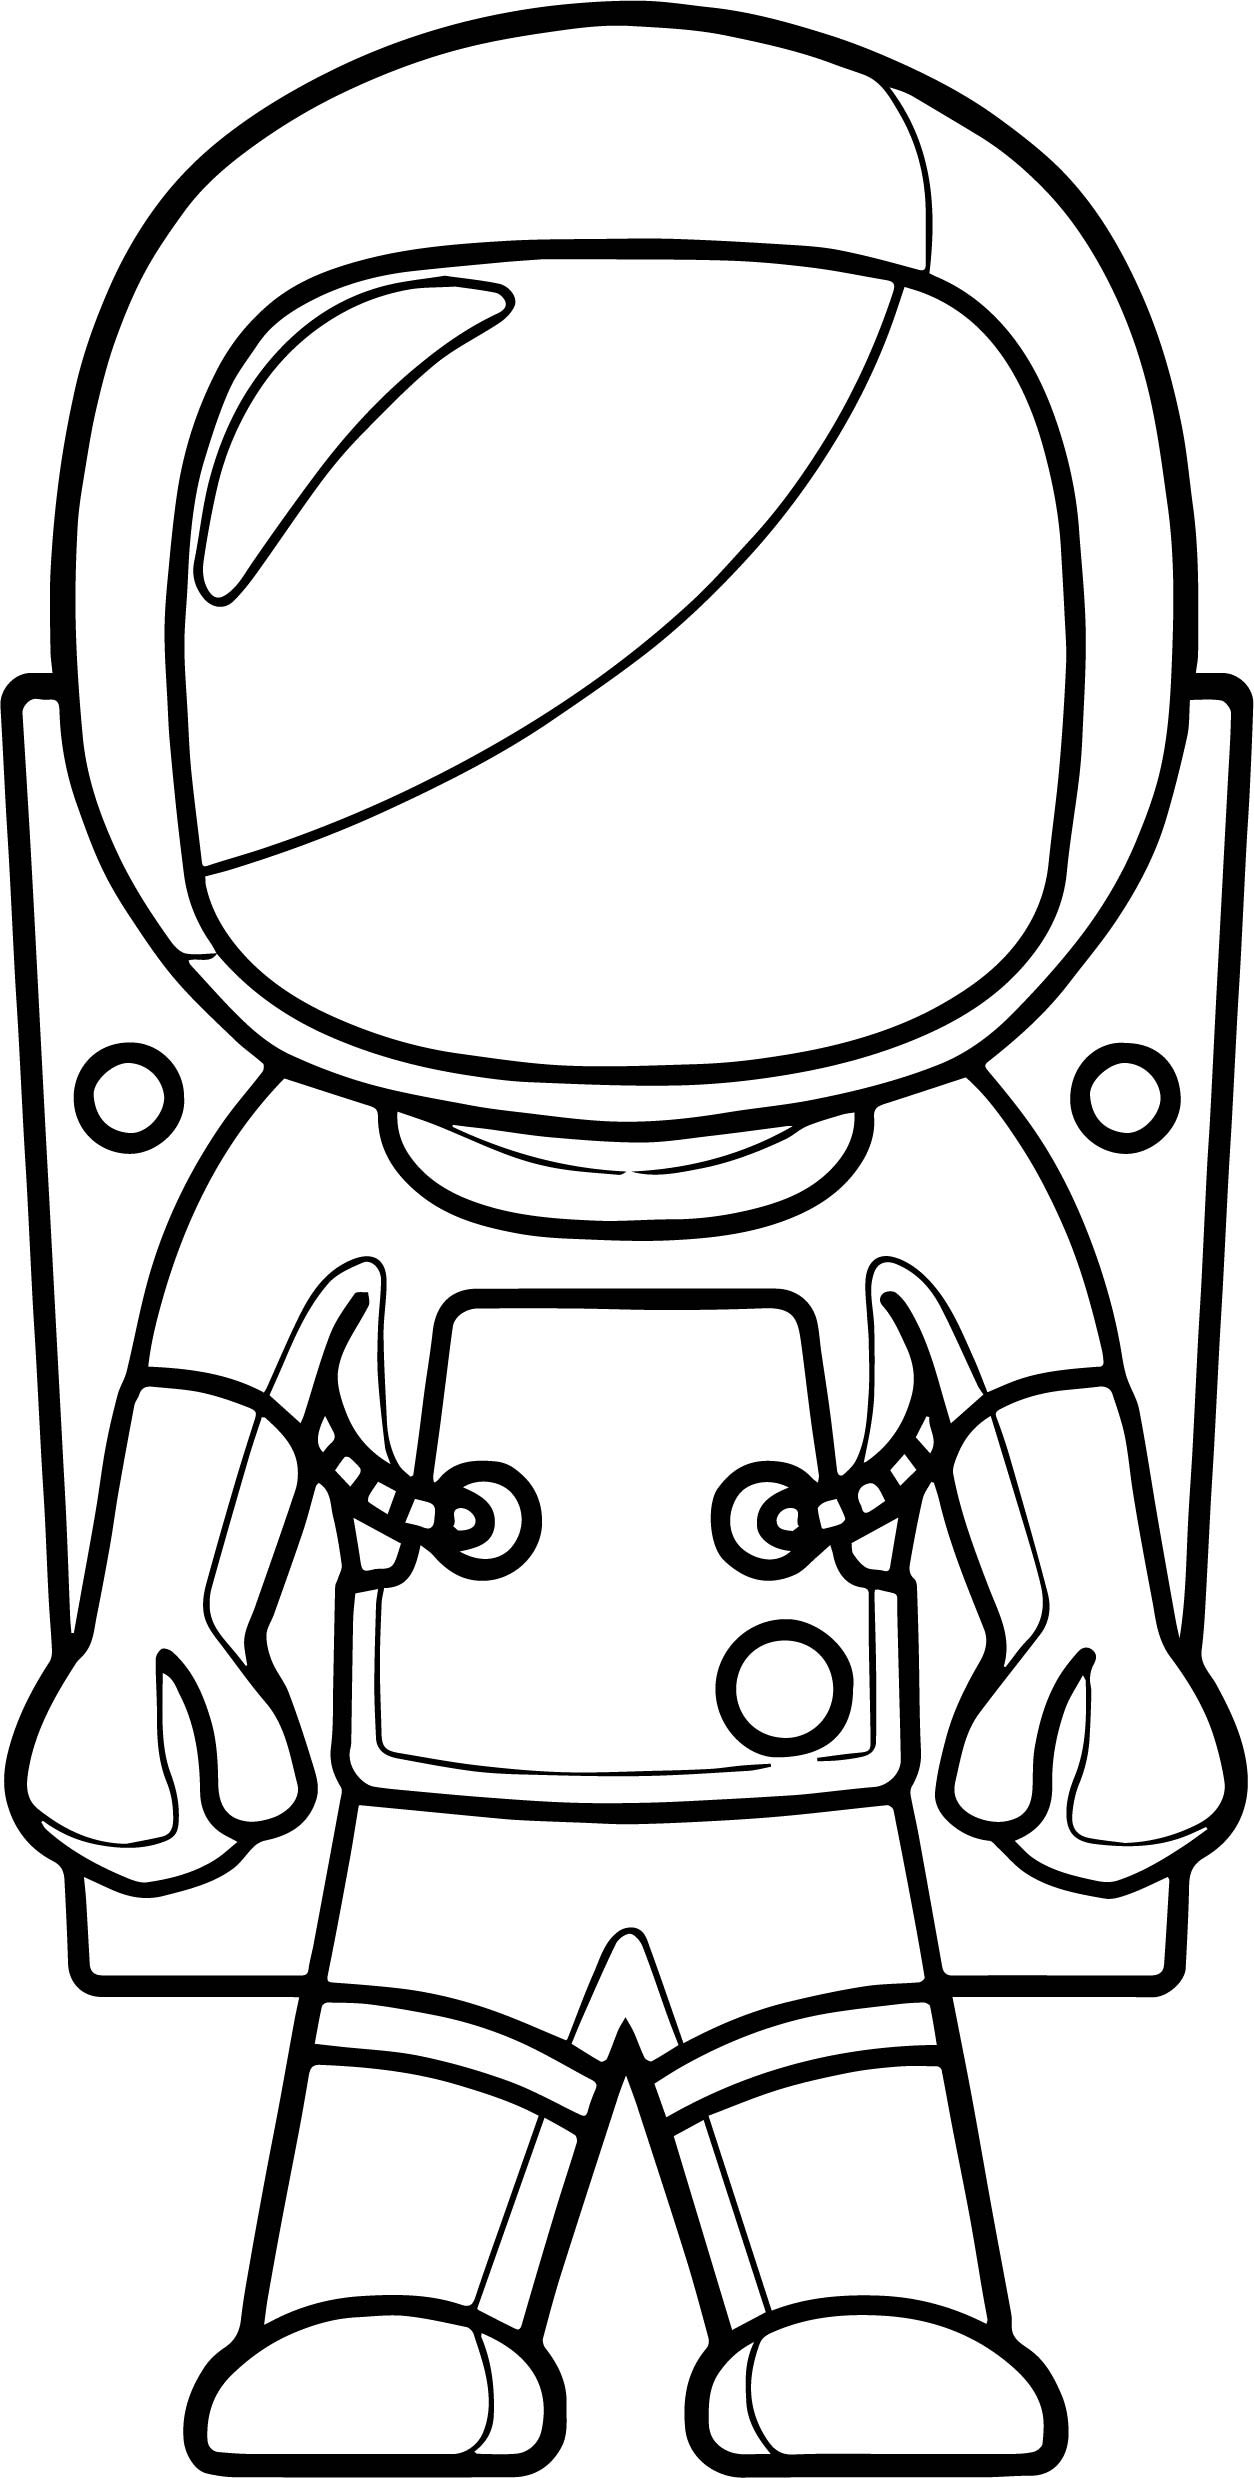 Astronaut Coloring Pages at GetDrawings Free download